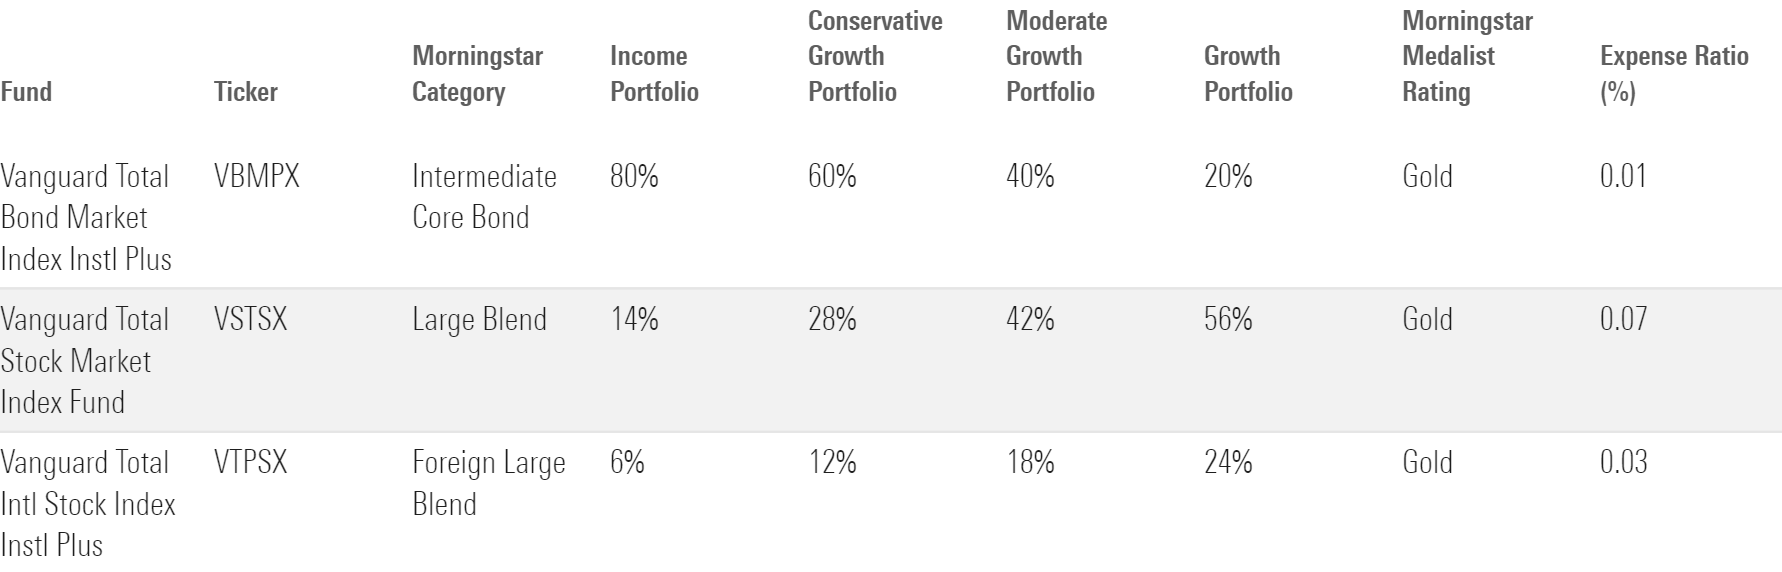 A table showing the underlying investment allocations for the Vanguard program's multi-asset portfolio solutions.